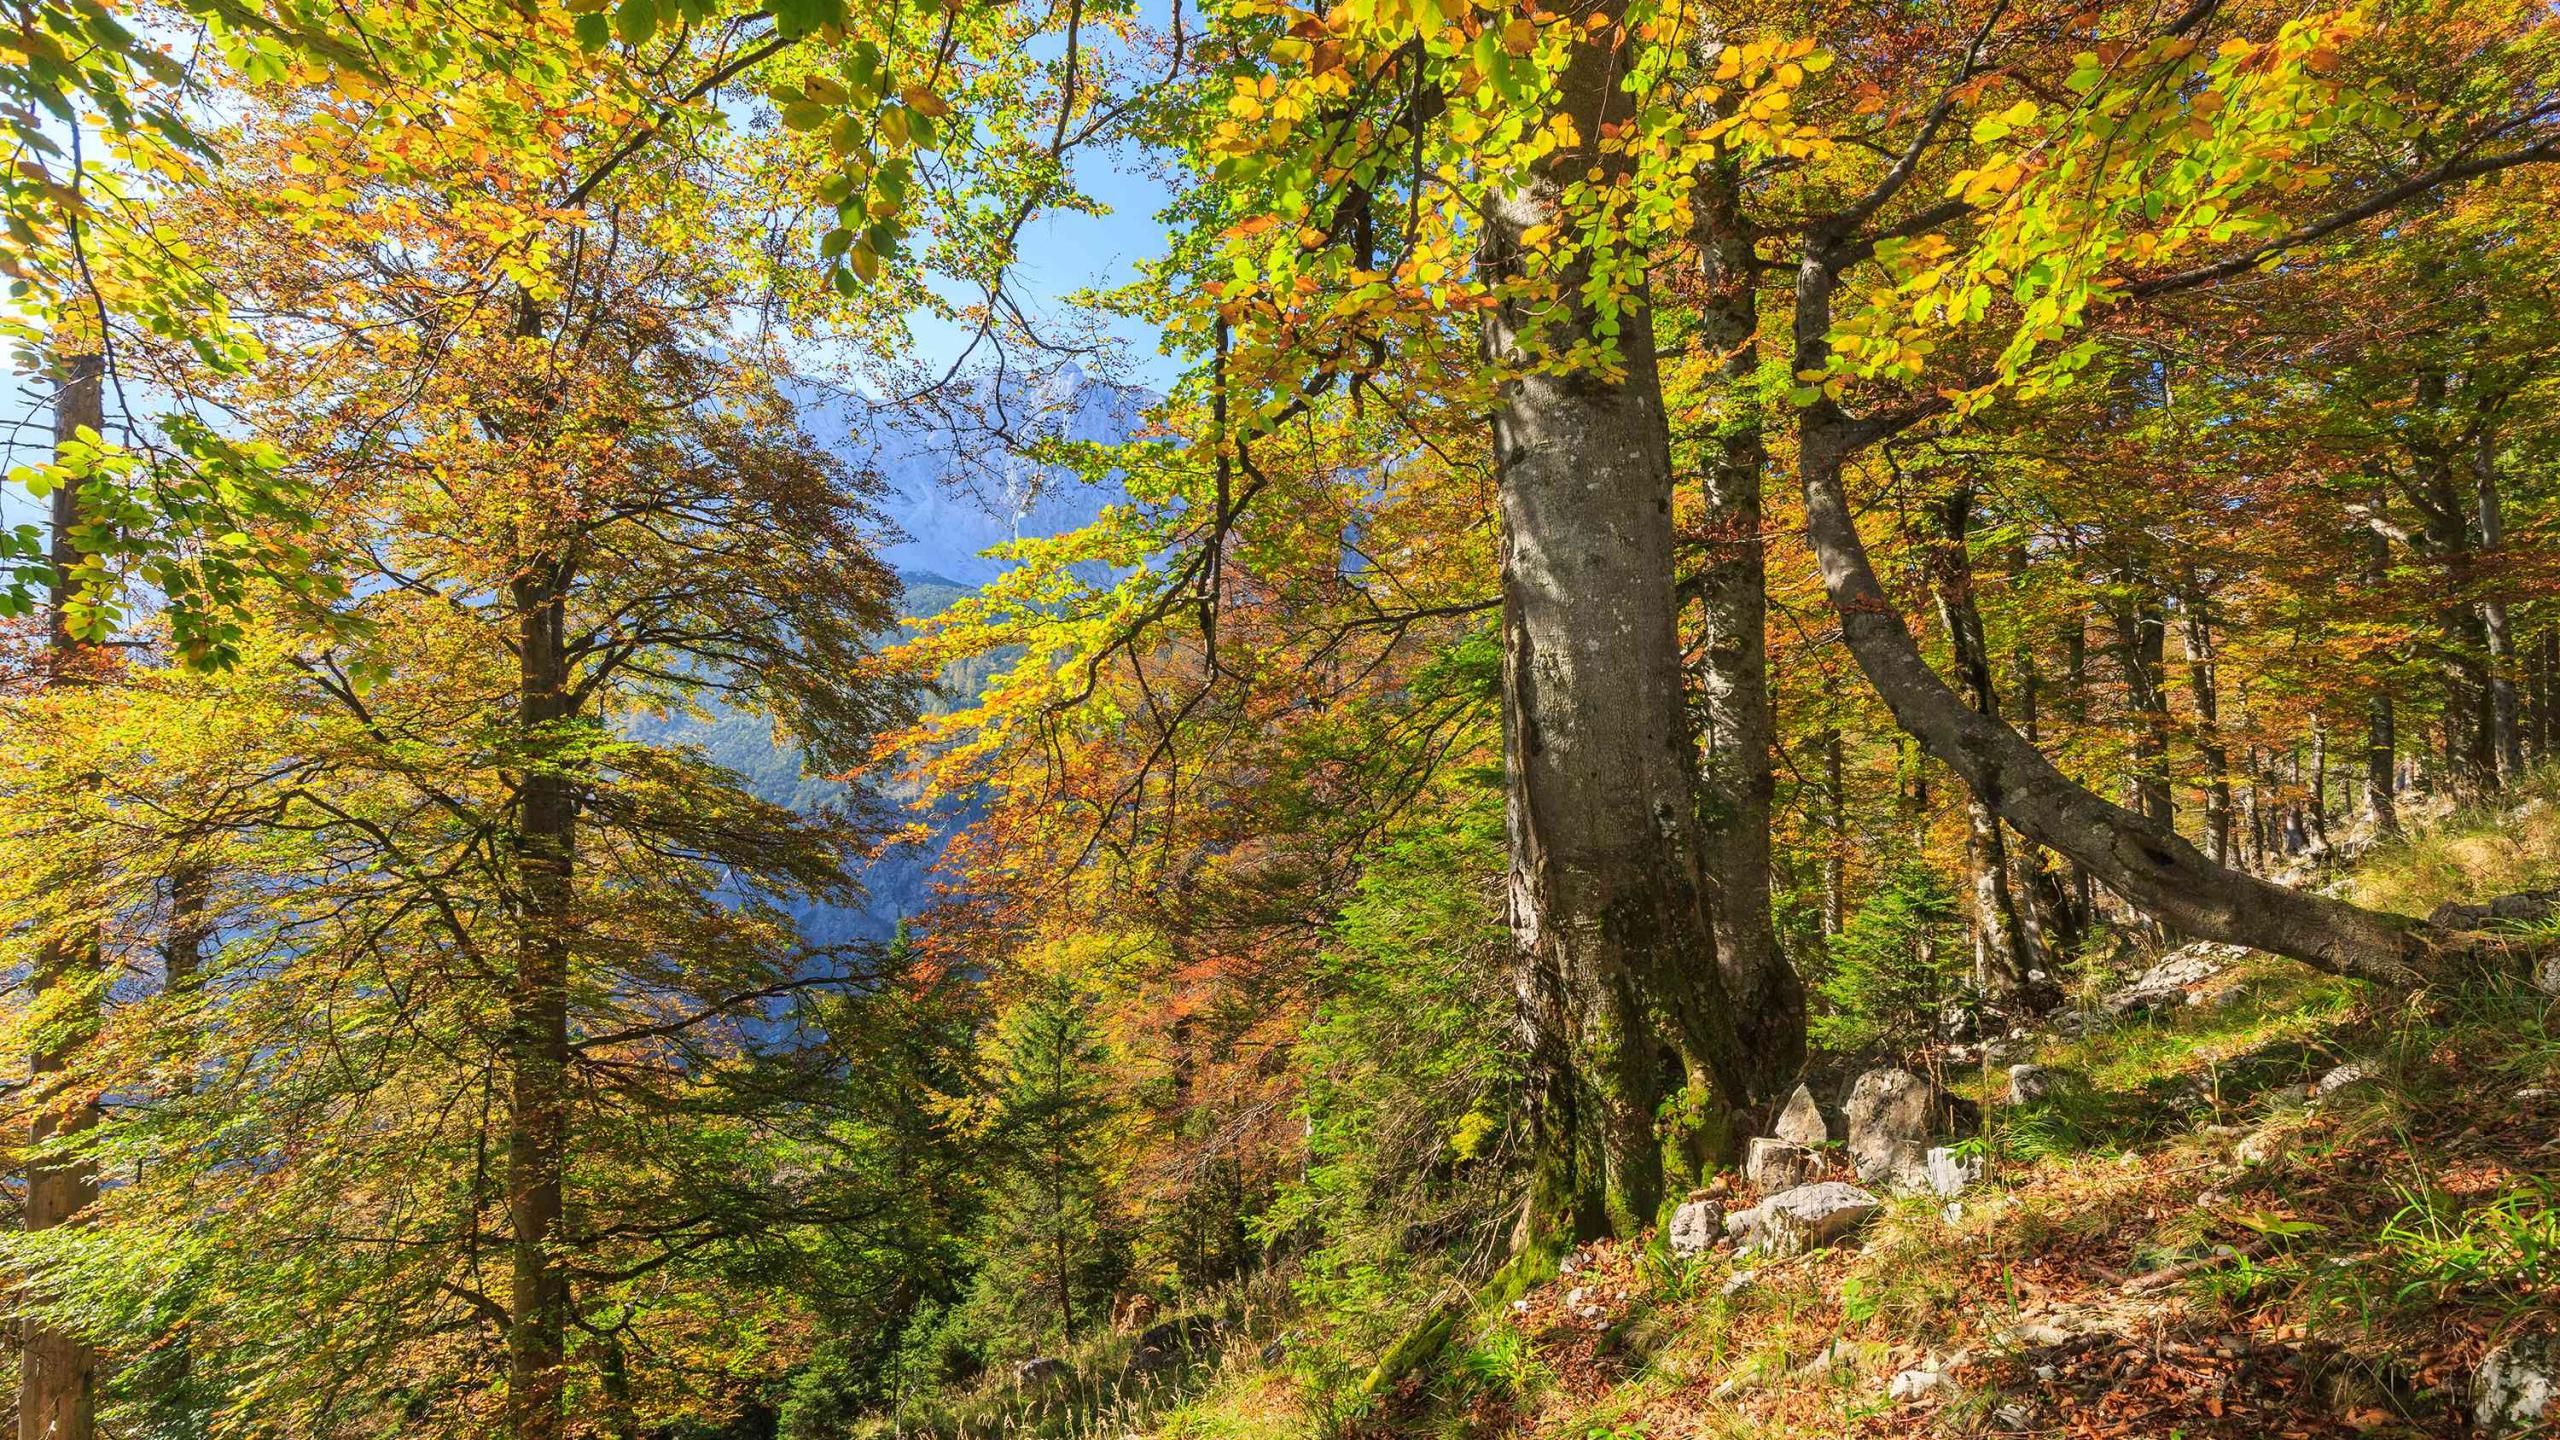 Mighty, autumn-colored beech trees stand on a mountainside